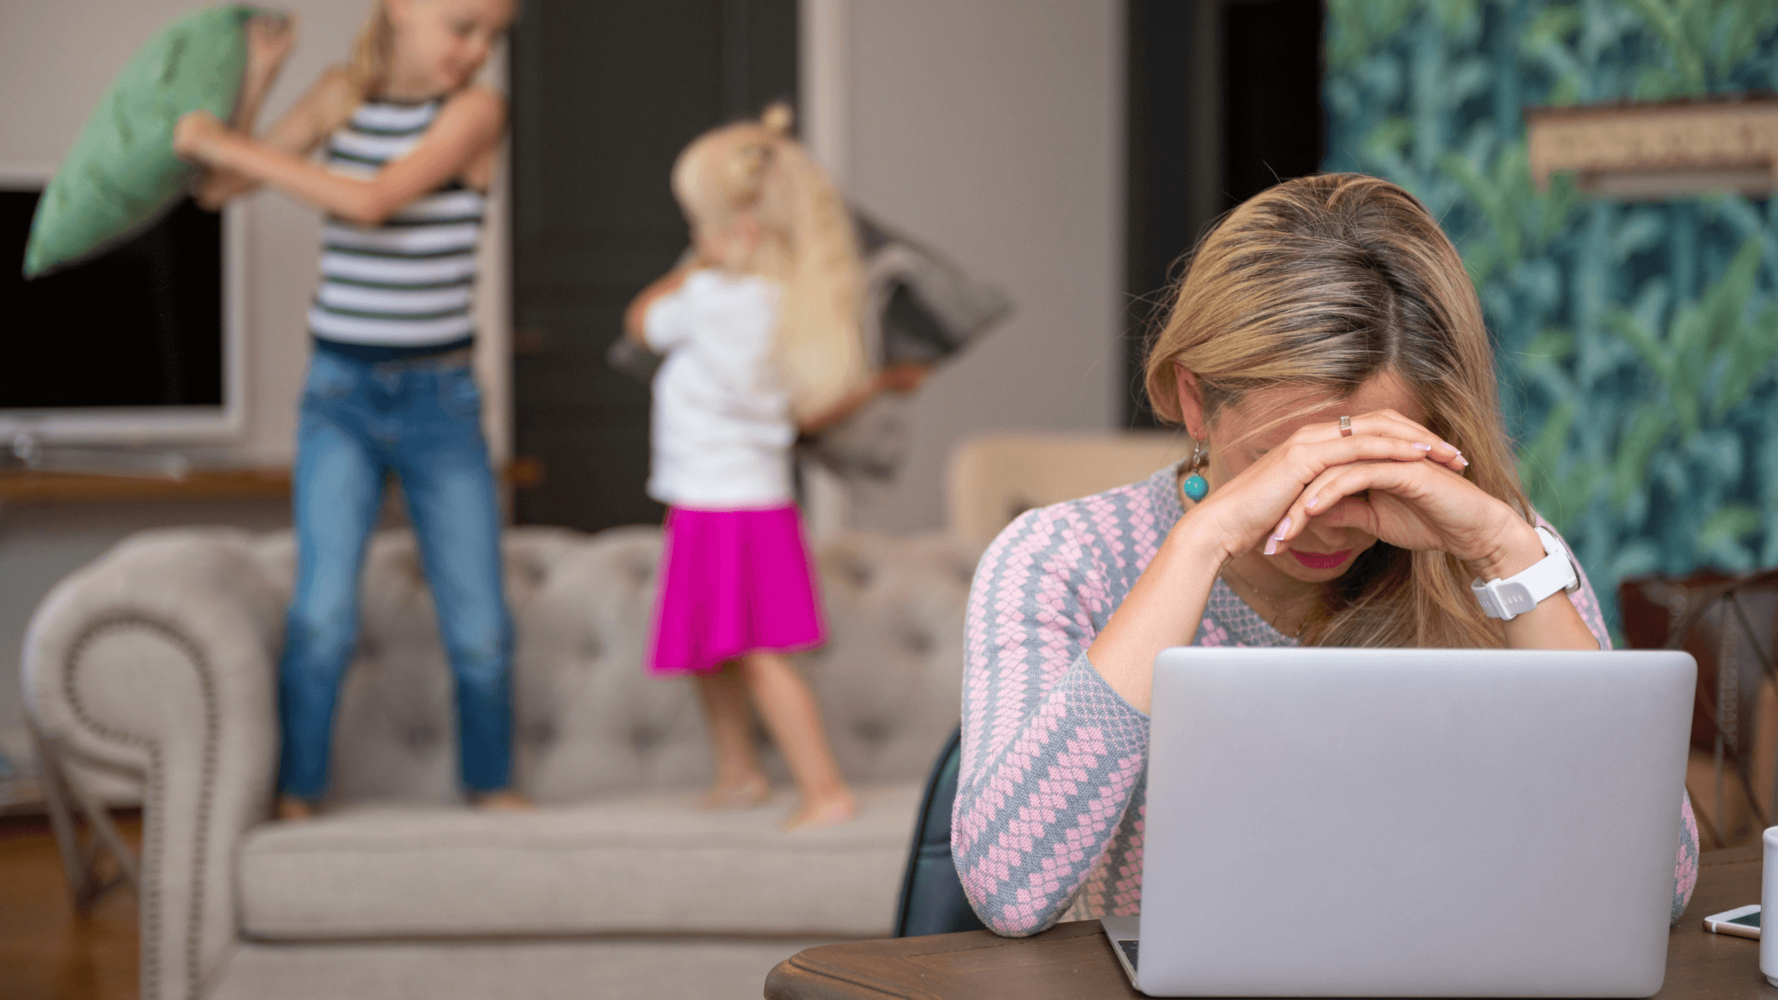 Exhausted mom with children misbehaving and experiencing burnout from working at home.